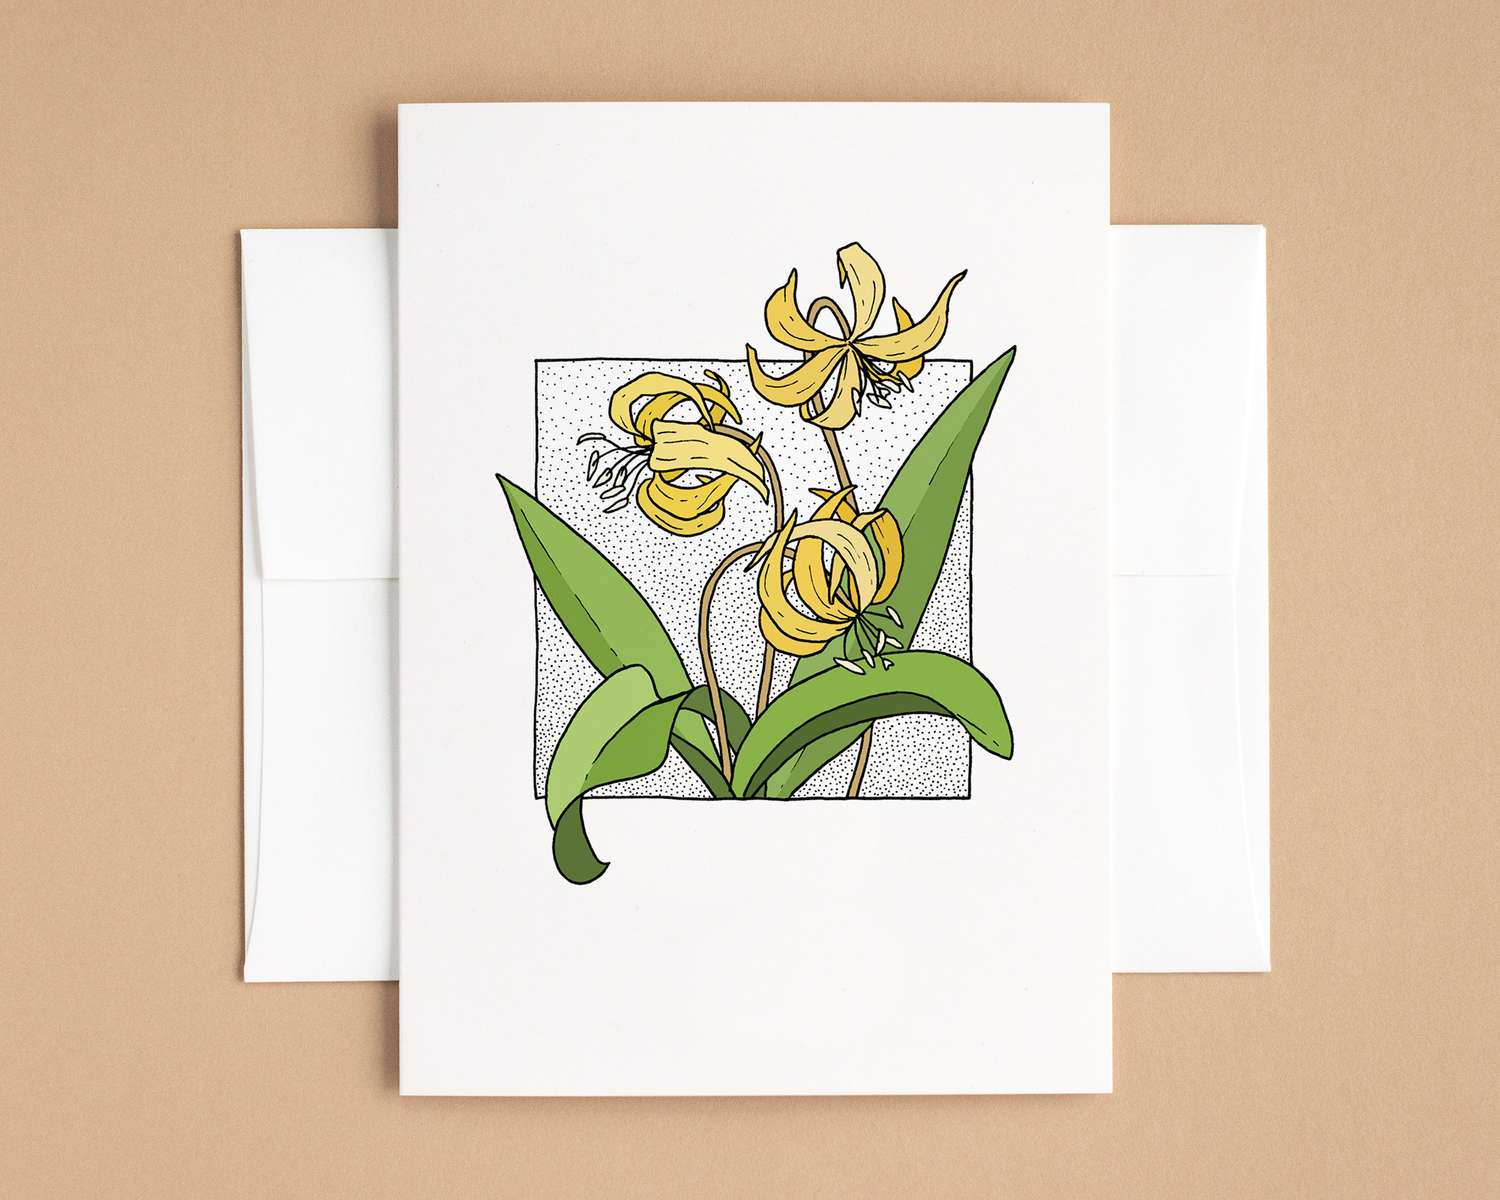 A vertical white card depicts a spray of yellow flowers surrounded by long spade-like leaves. The card sits on top of a white envelope, which lies on top of a brown backdrop.